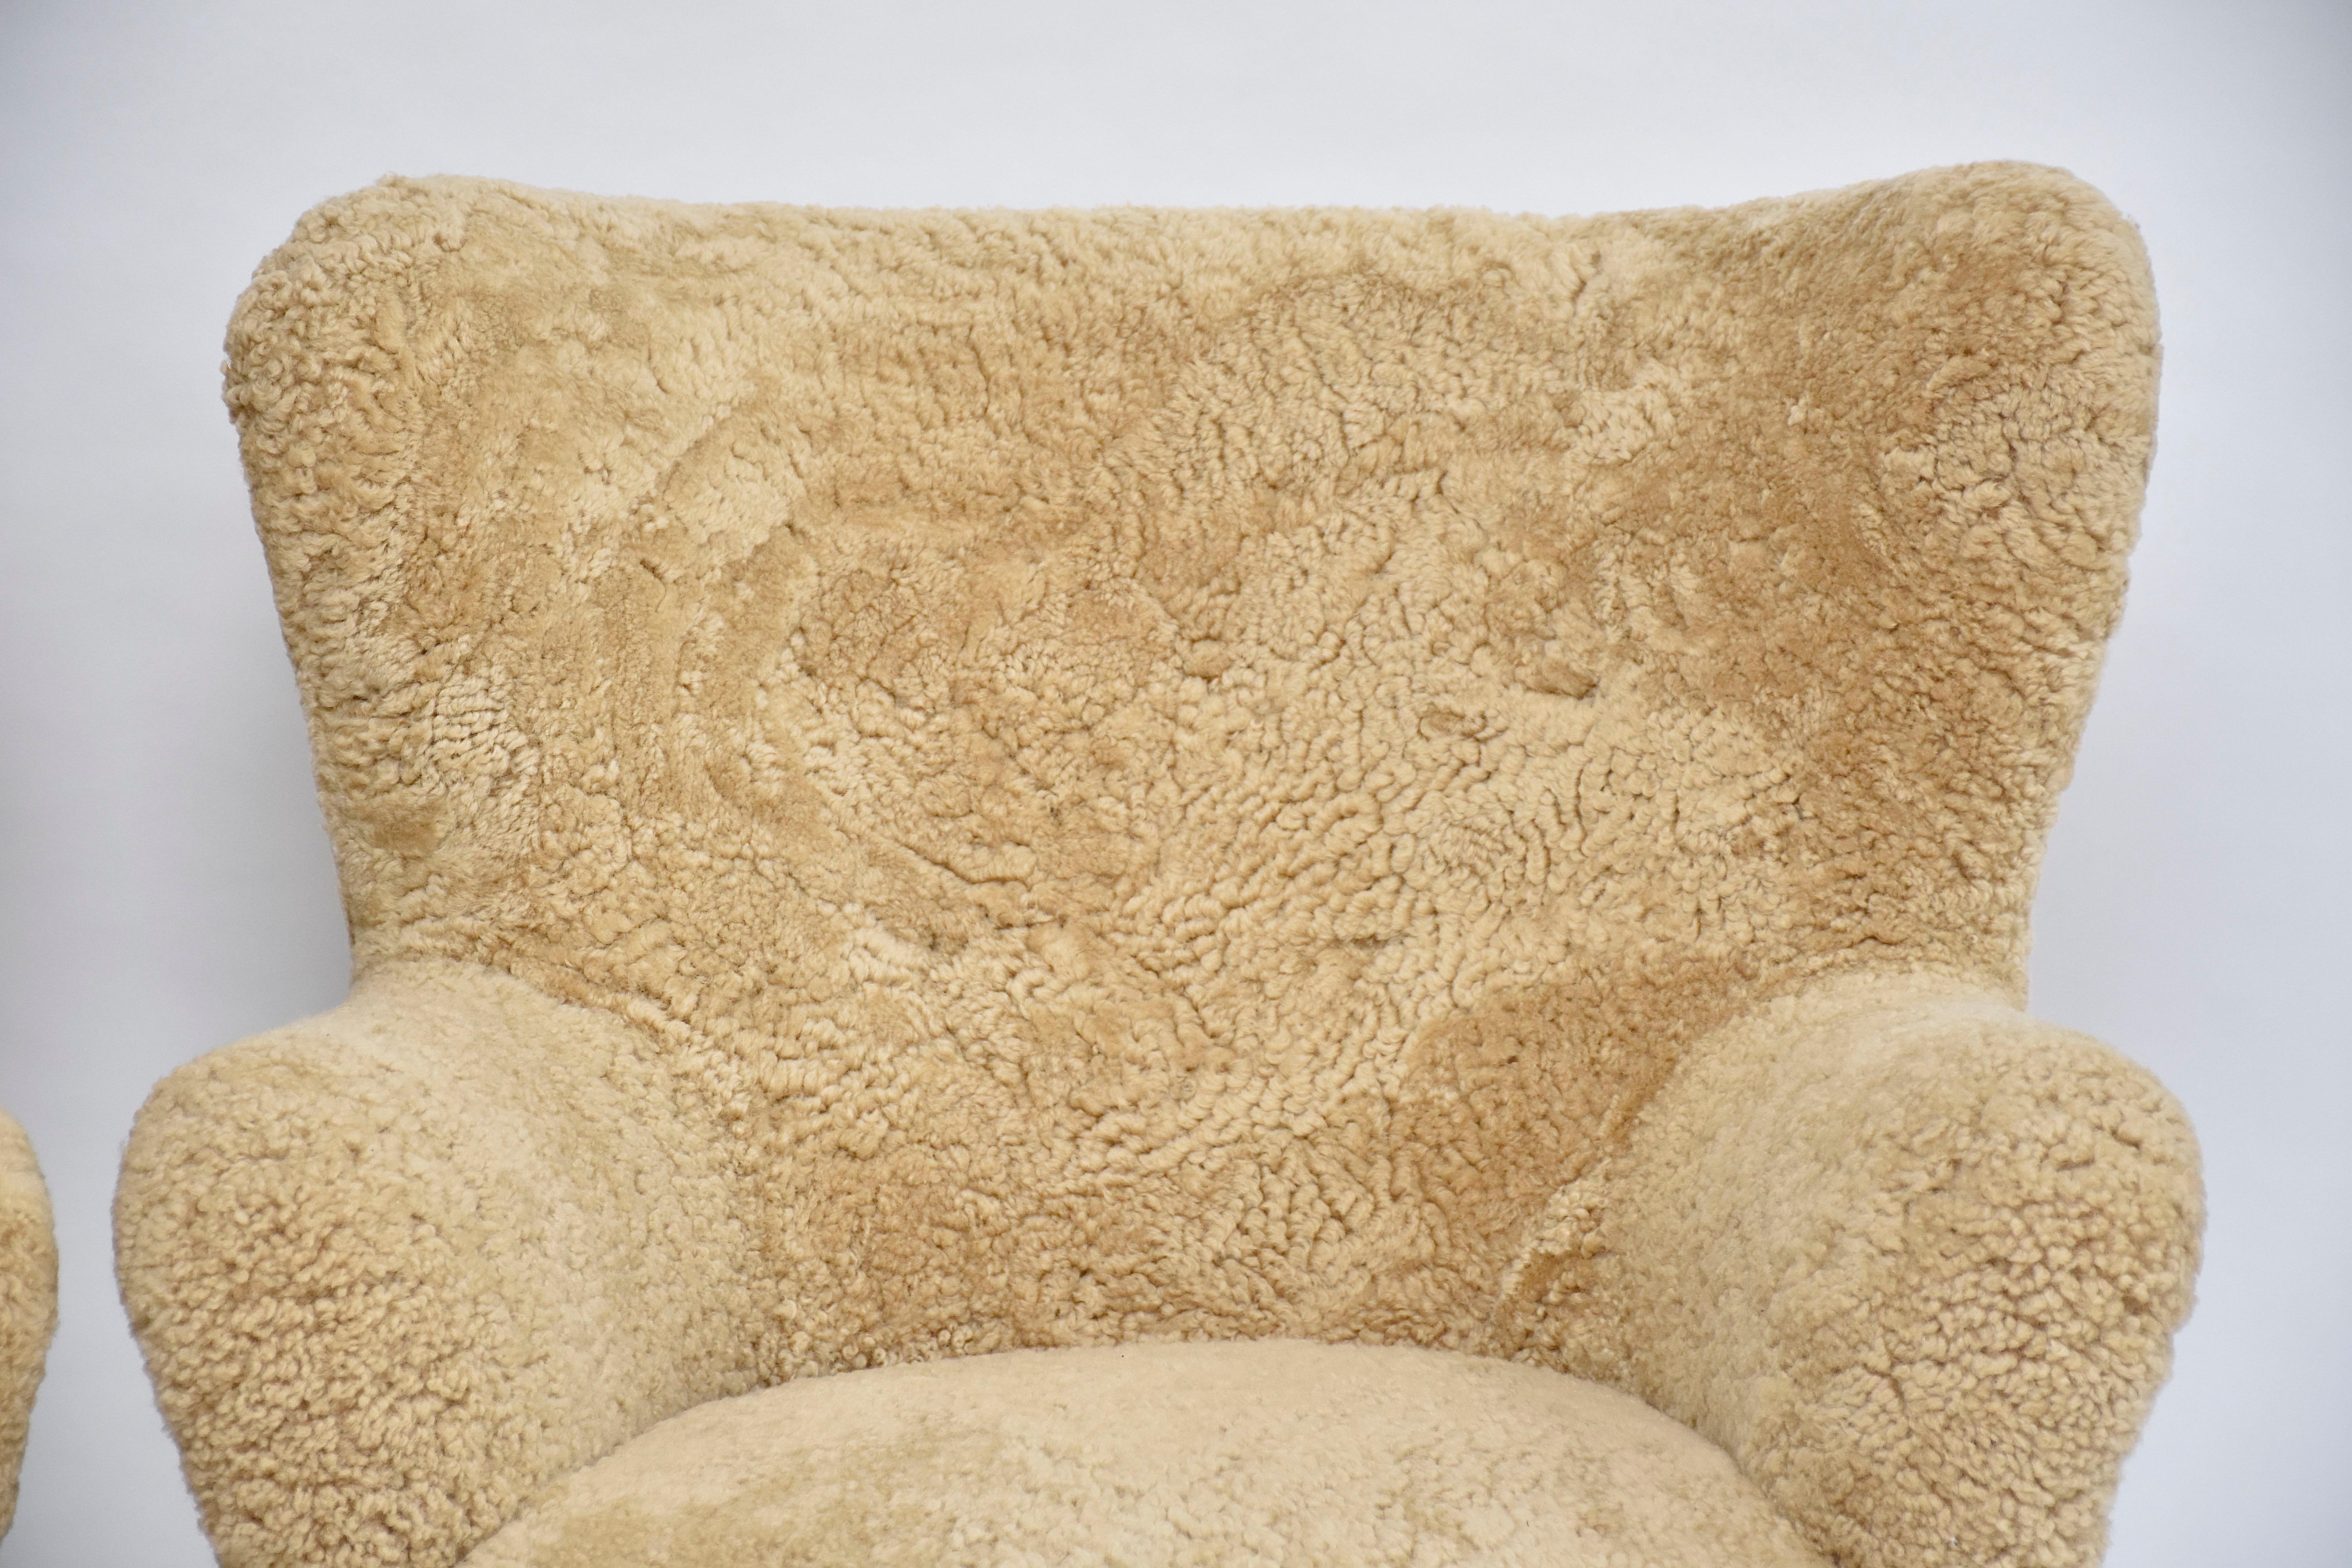 Finnish Pair of armchairs 'Laila' in honey sheepskin by Ilmari Lappalainen for Asko 1948 For Sale